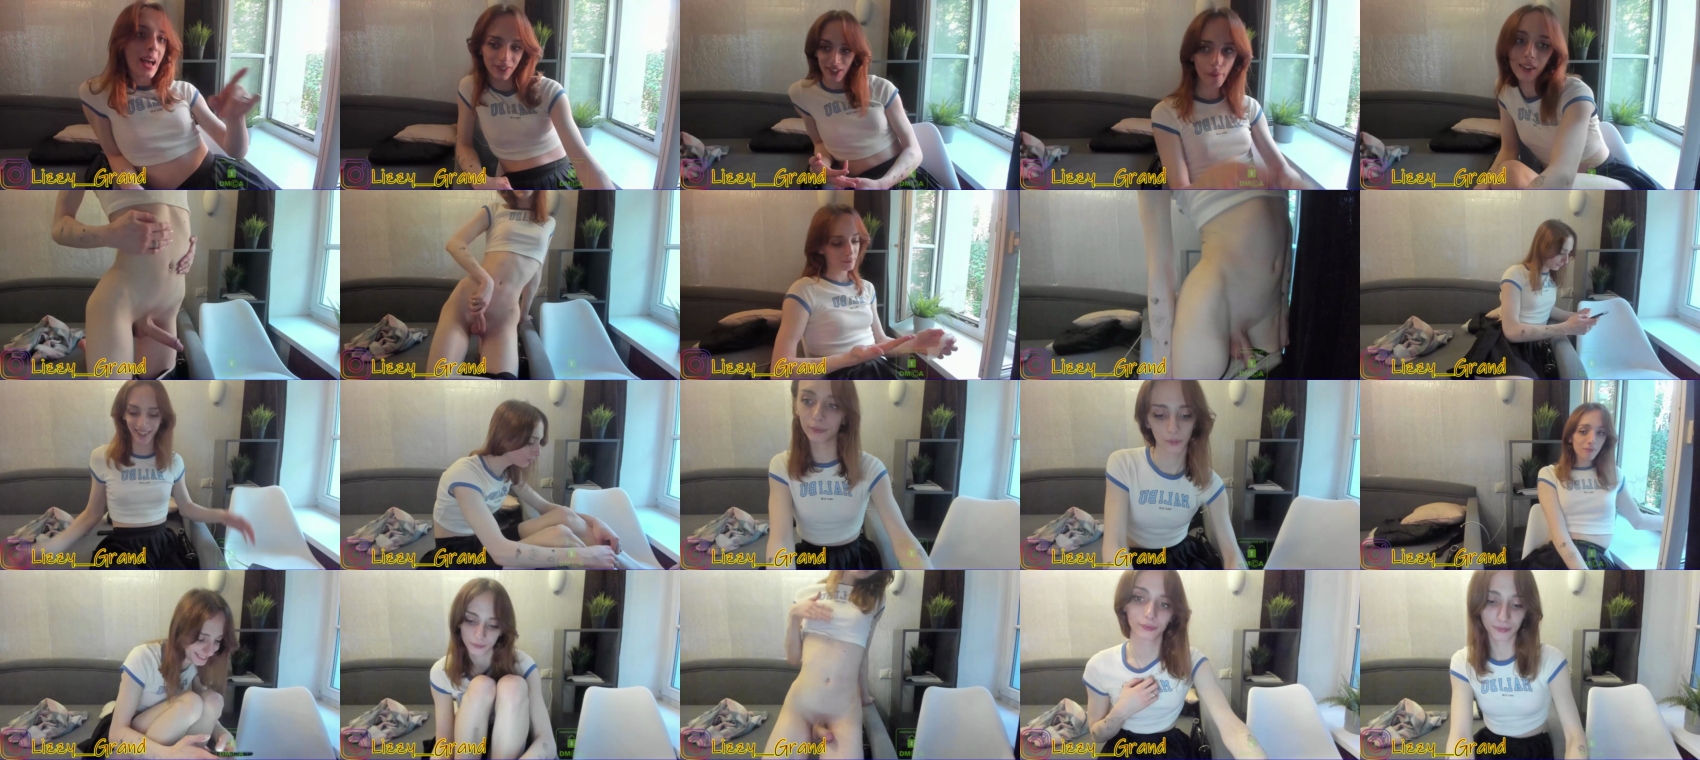 lizzy__grand ts 10-06-2022  trans toy